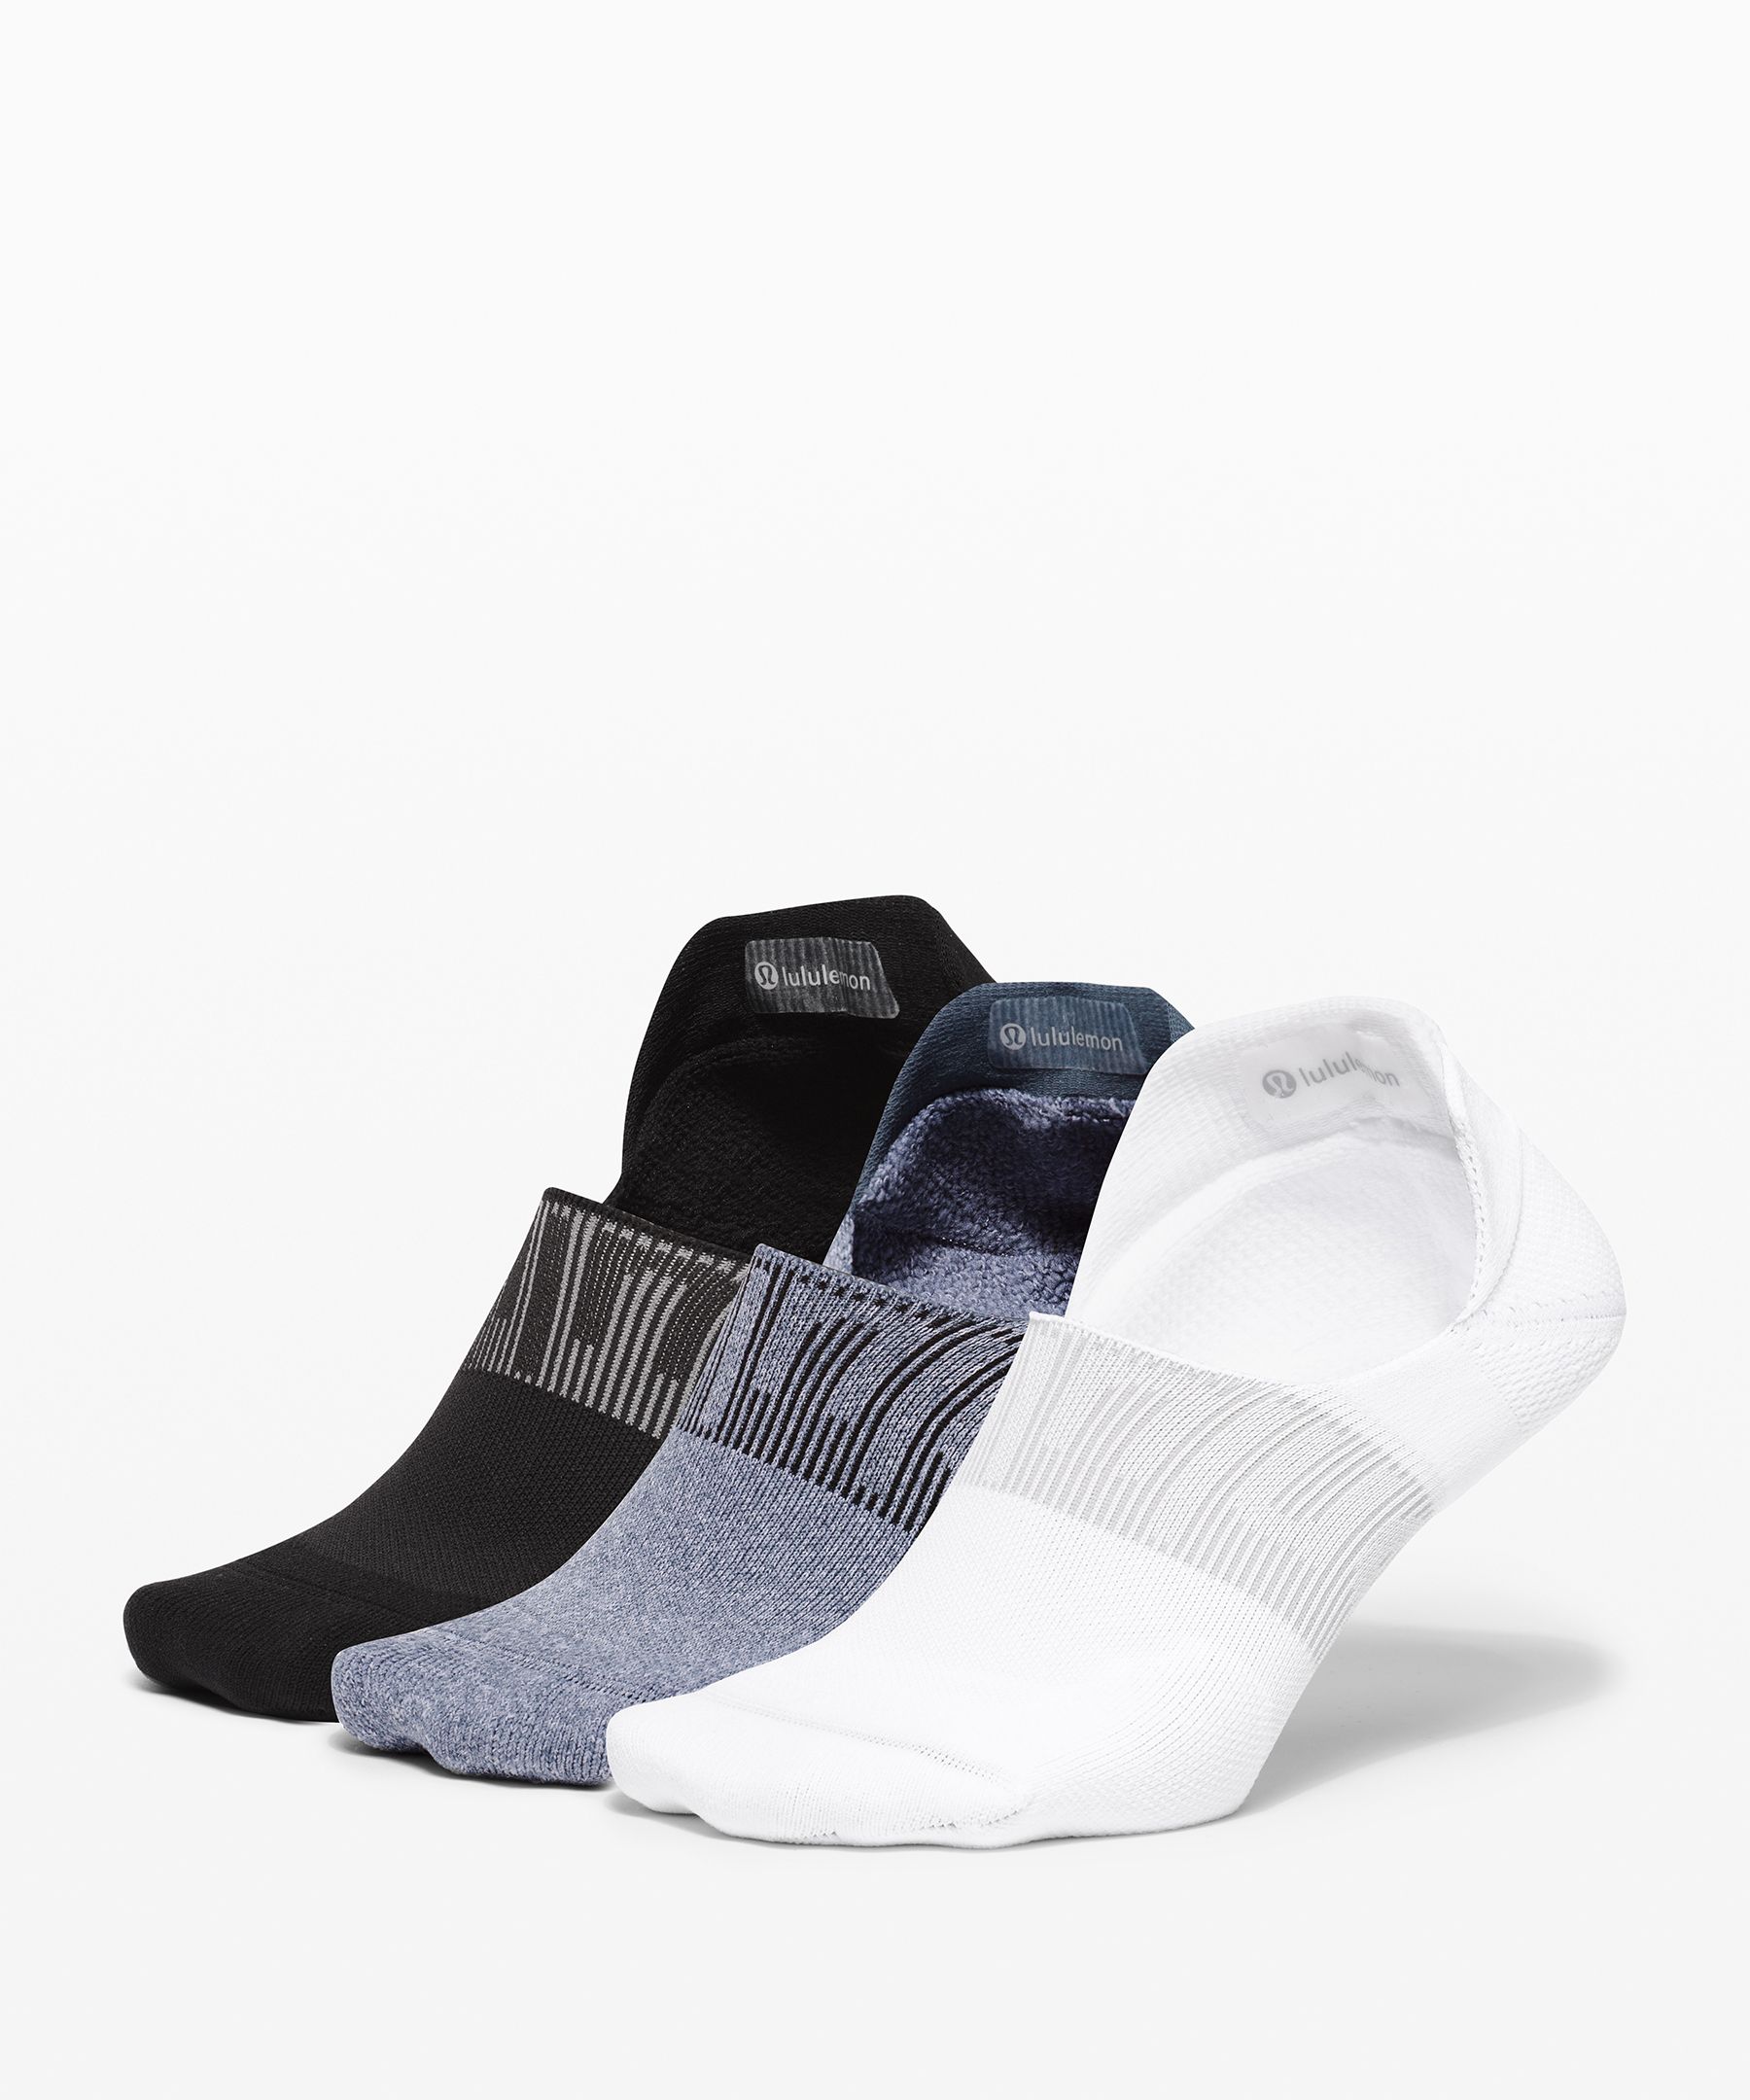 Lululemon Power Stride No-show Socks With Active Grip 3 Pack In White/iron Blue/black